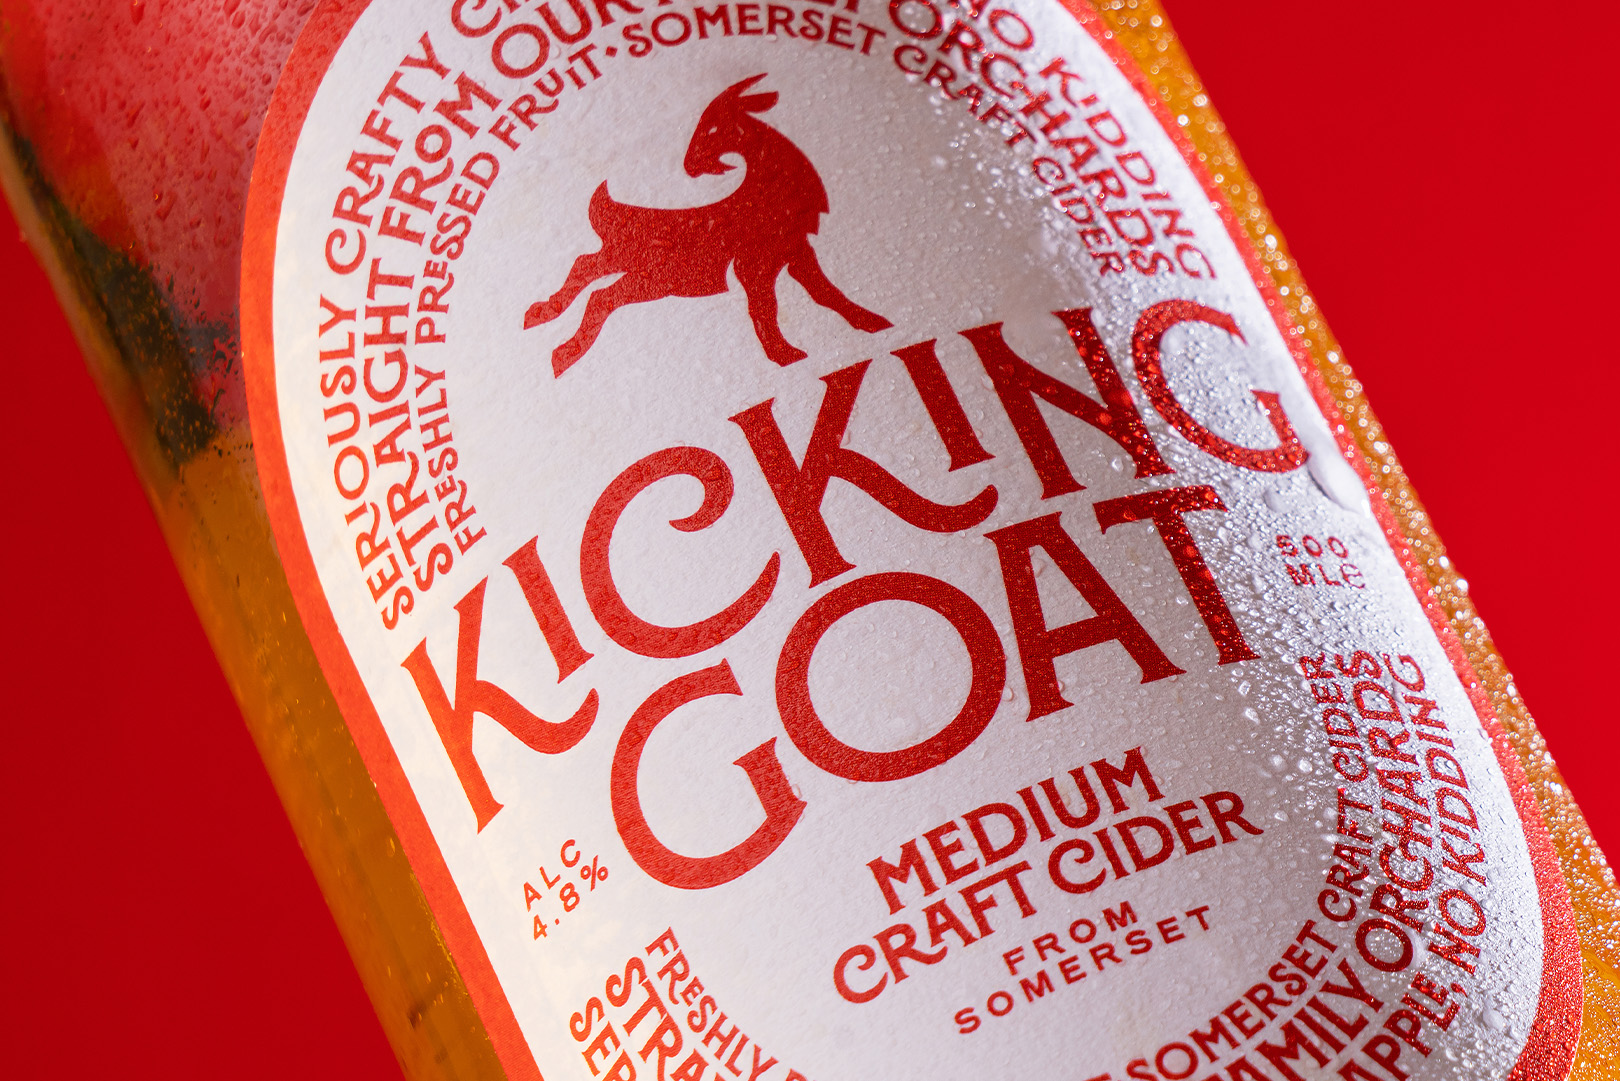 Kicking Goat Cider Identity and Label Design Created by Limegreentangerine